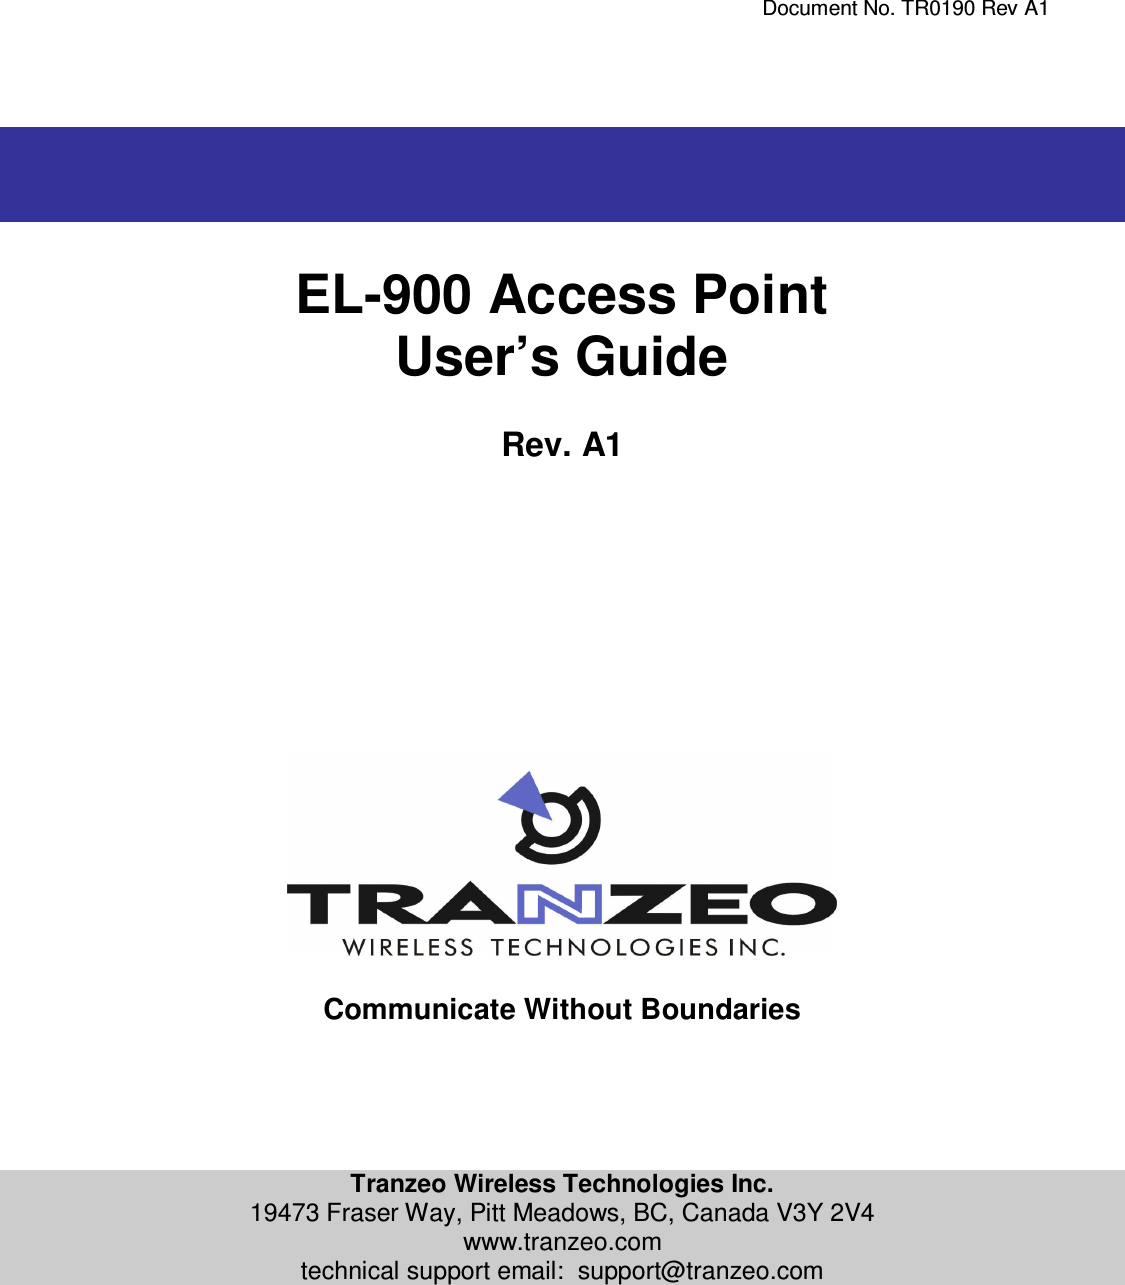     Document No. TR0190 Rev A1     EL-900 Access Point User’s Guide  Rev. A1                   Communicate Without Boundaries      Tranzeo Wireless Technologies Inc. 19473 Fraser Way, Pitt Meadows, BC, Canada V3Y 2V4 www.tranzeo.com technical support email:  support@tranzeo.com   